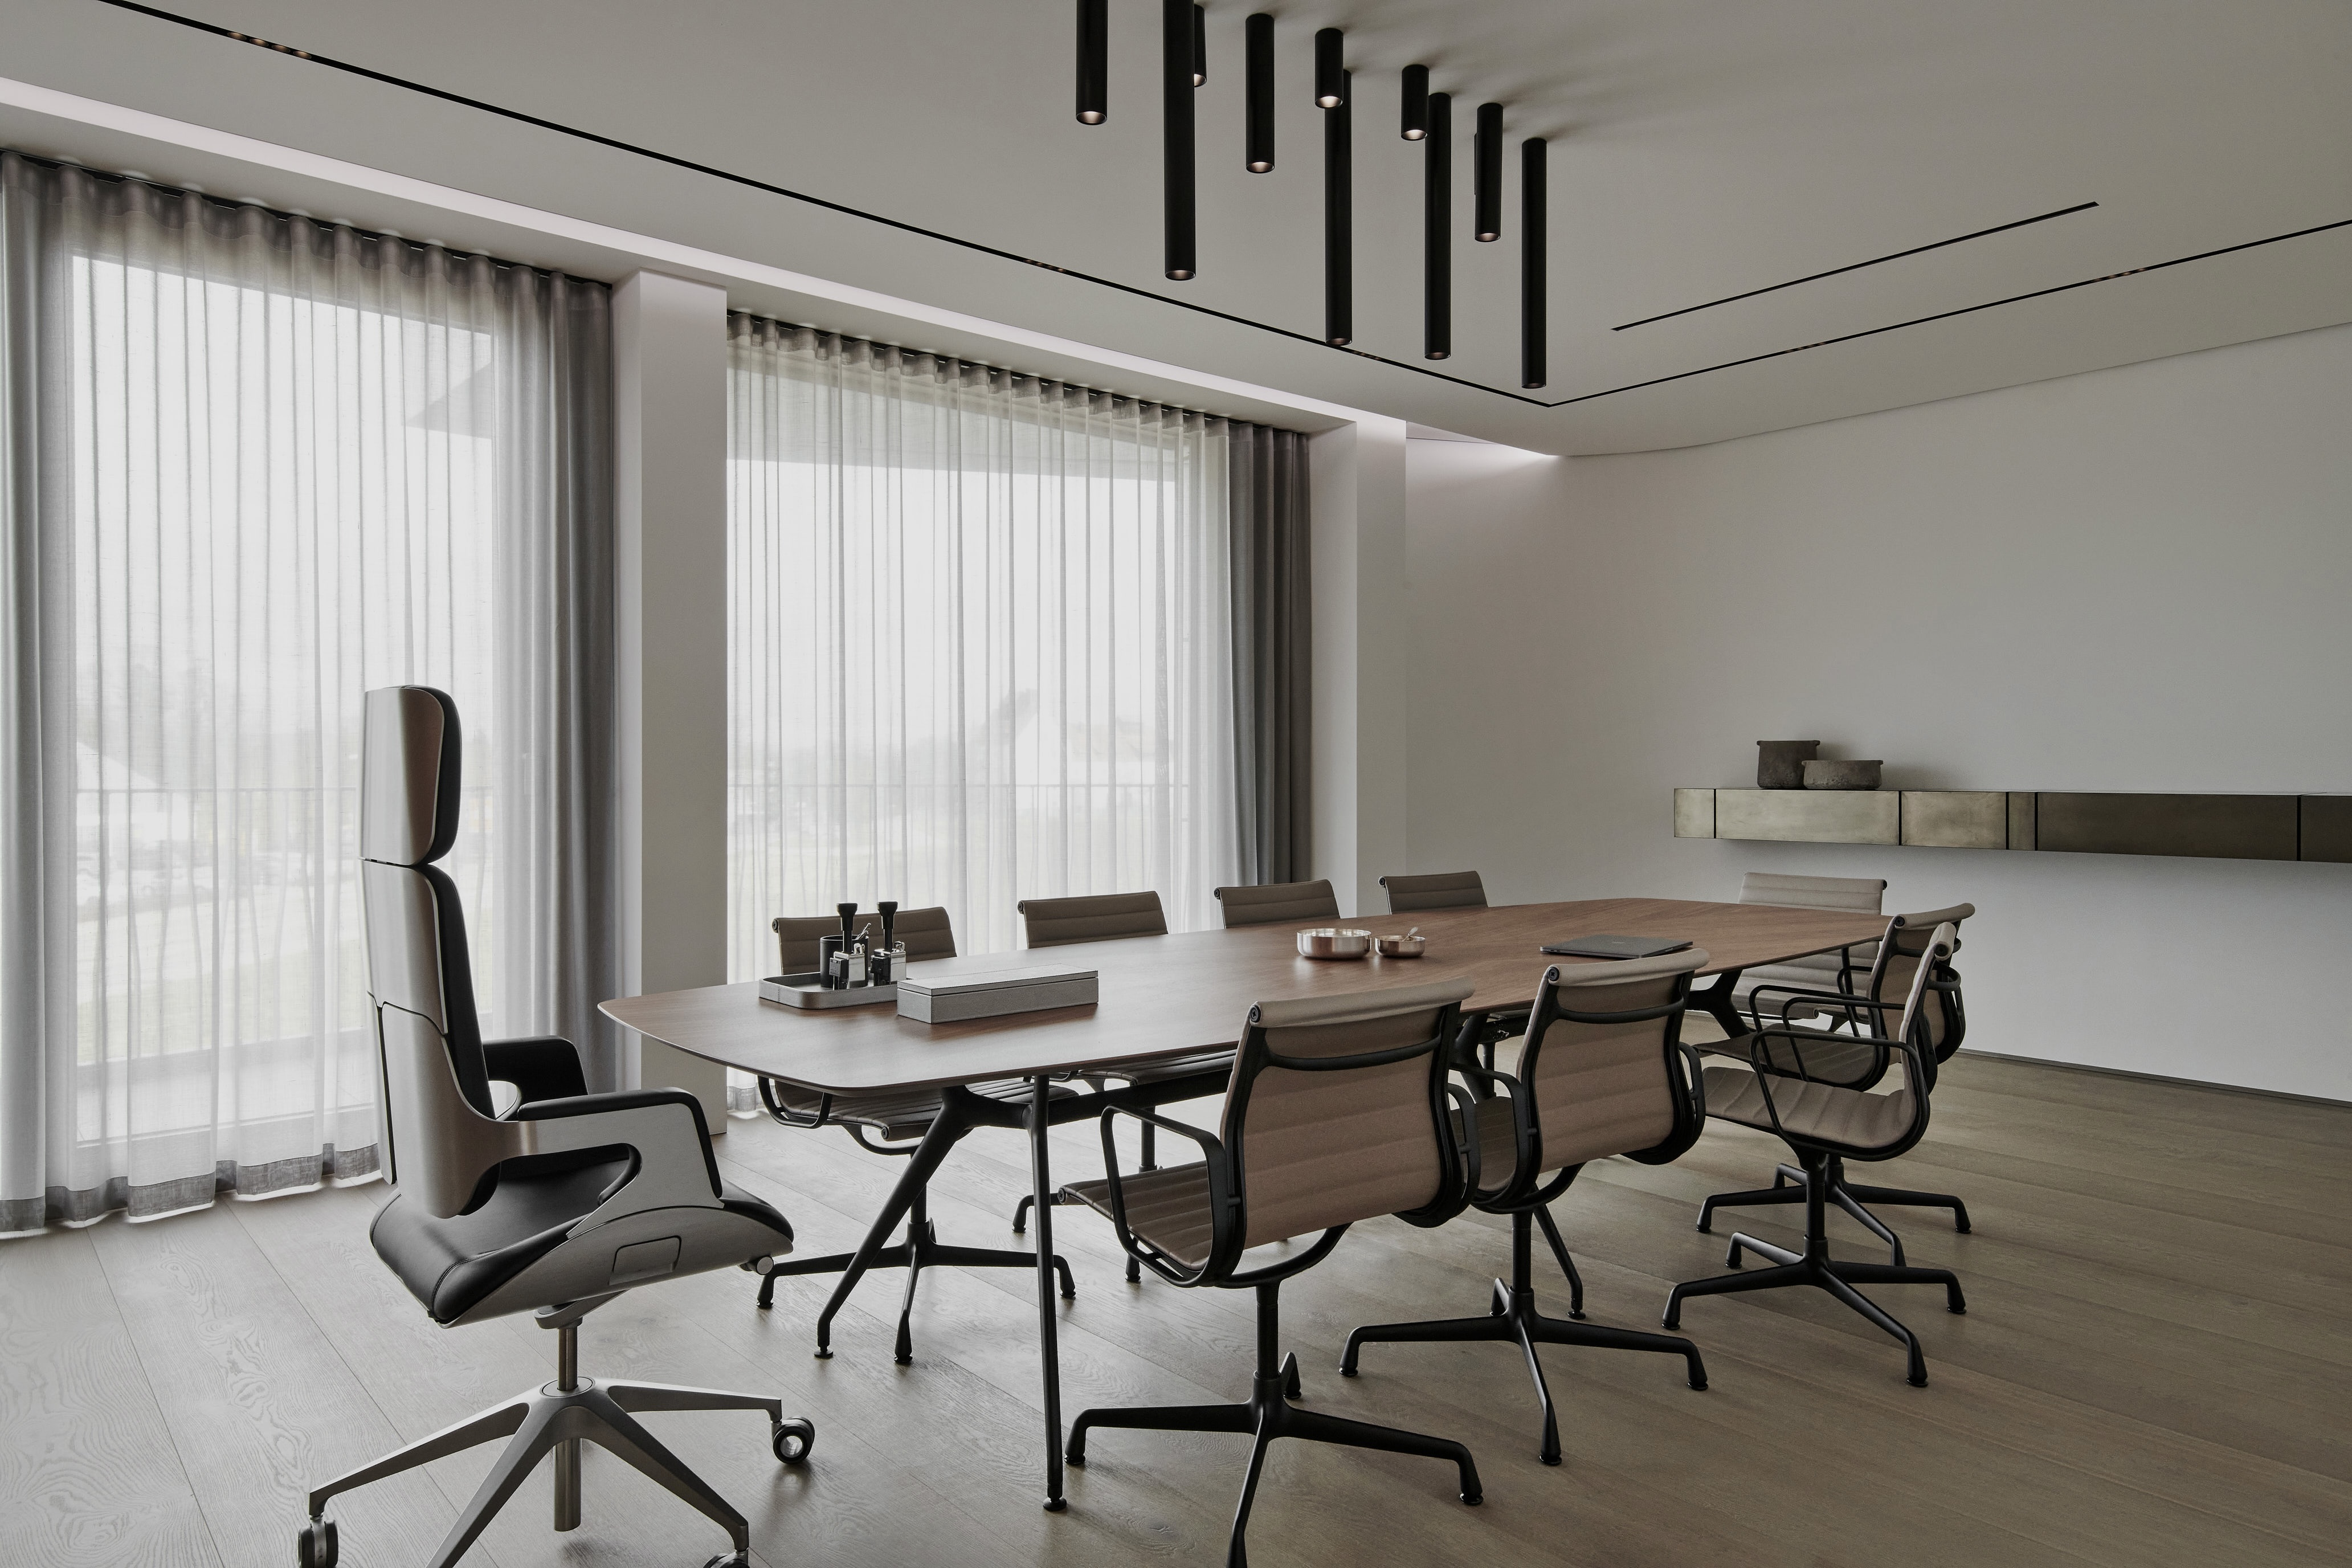 Conference Room Walnut Wood Table Rimadesio Vitra Lounge Chair Interstuhl